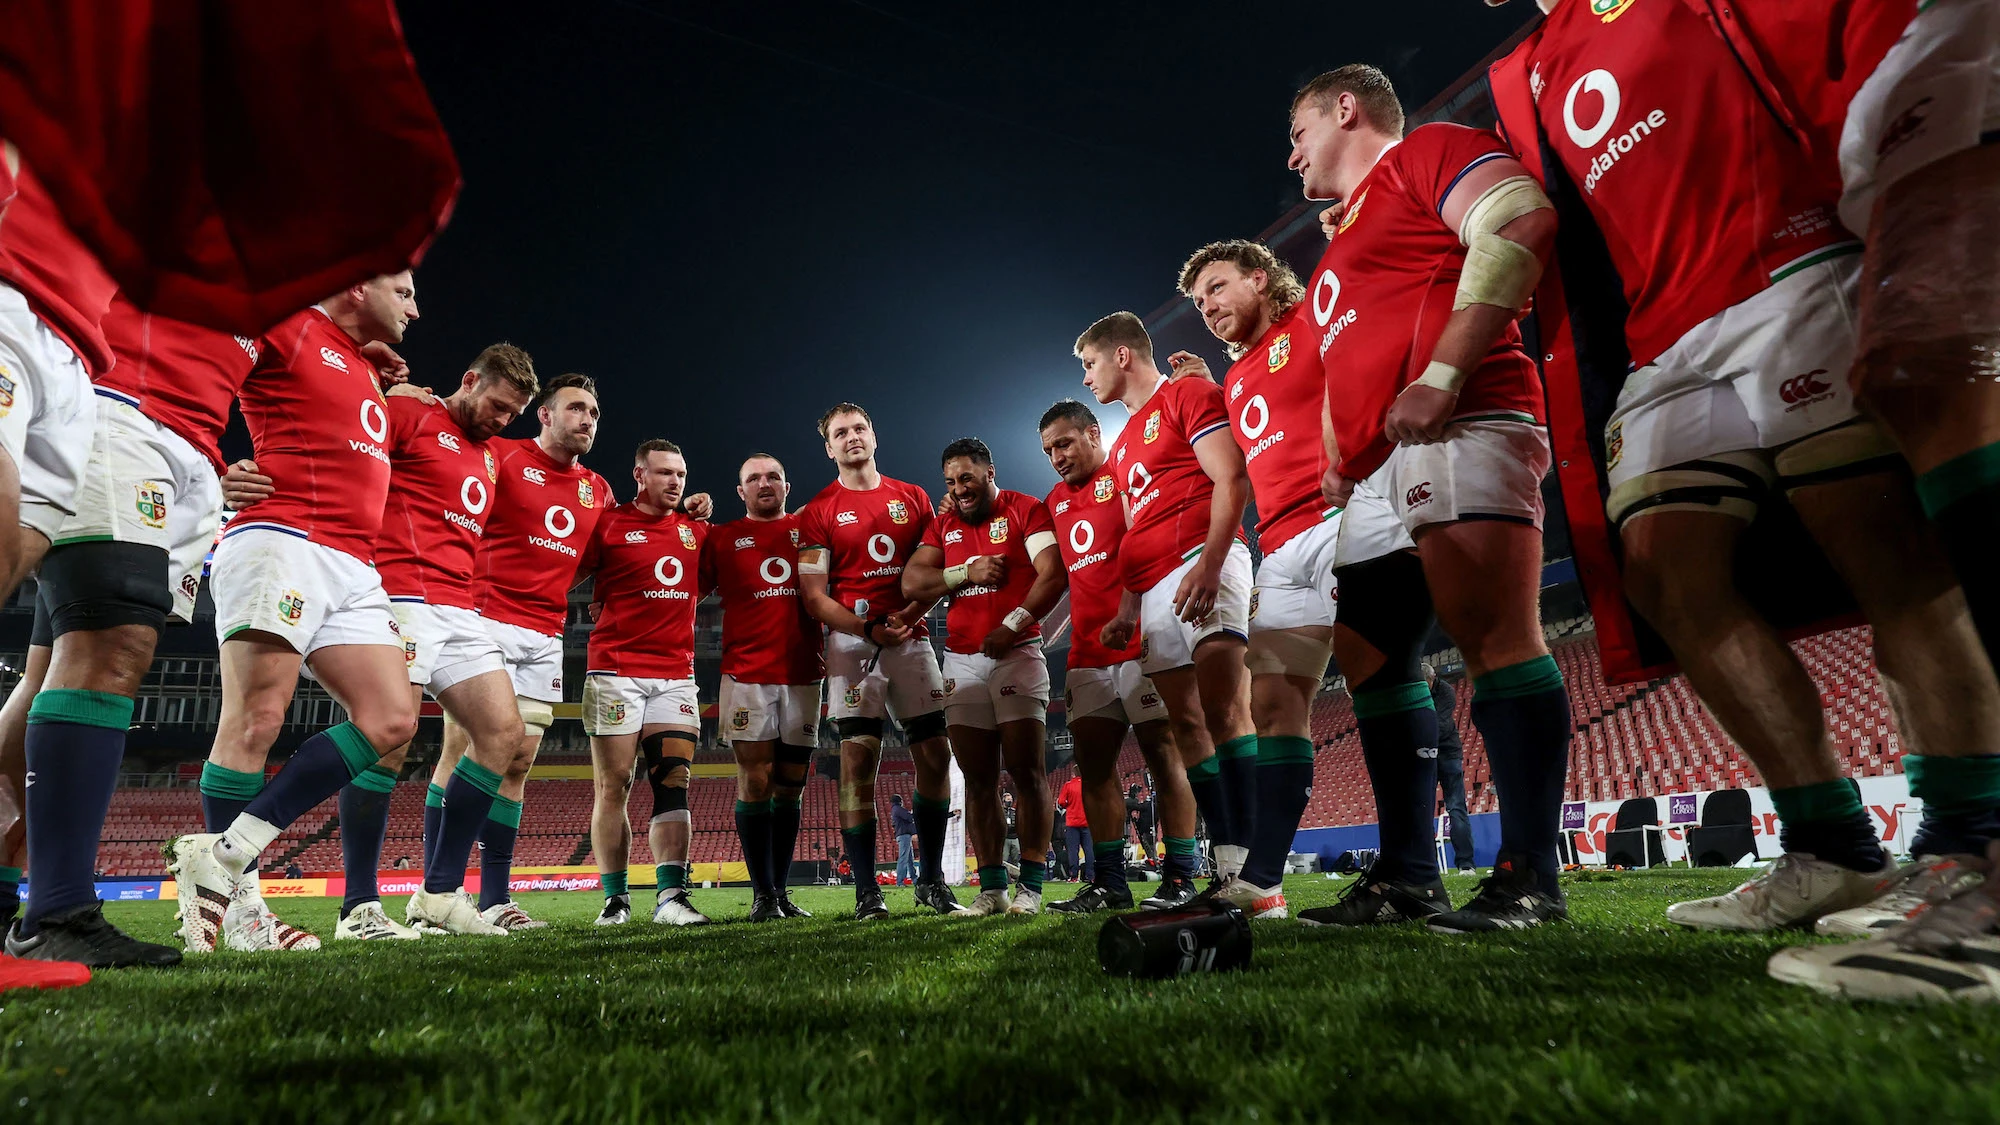 A view of the British  Irish Lions team huddle after the game 7/7/2021